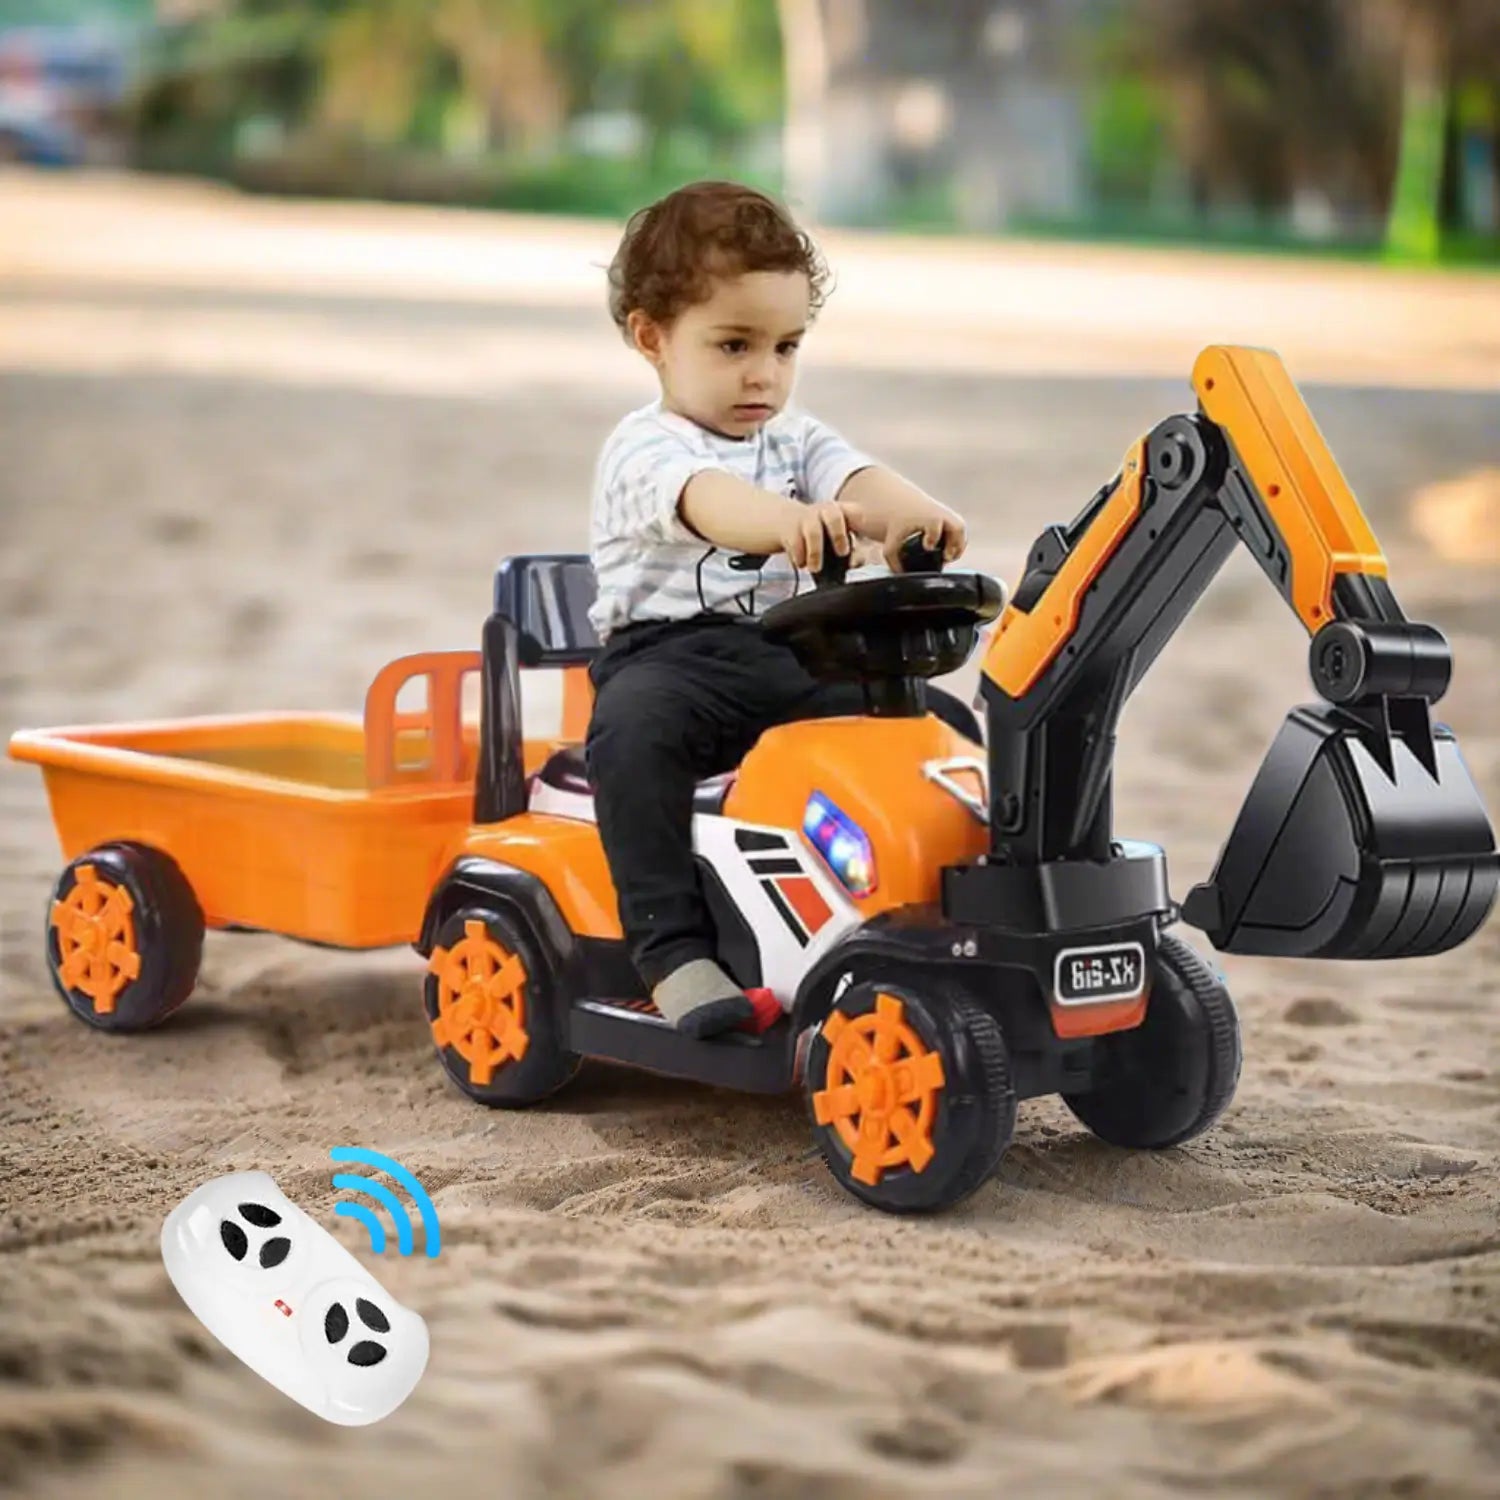 Children's Riding Excavator Electric Ride On Digger Toy 6 Volt Pedal Excavator